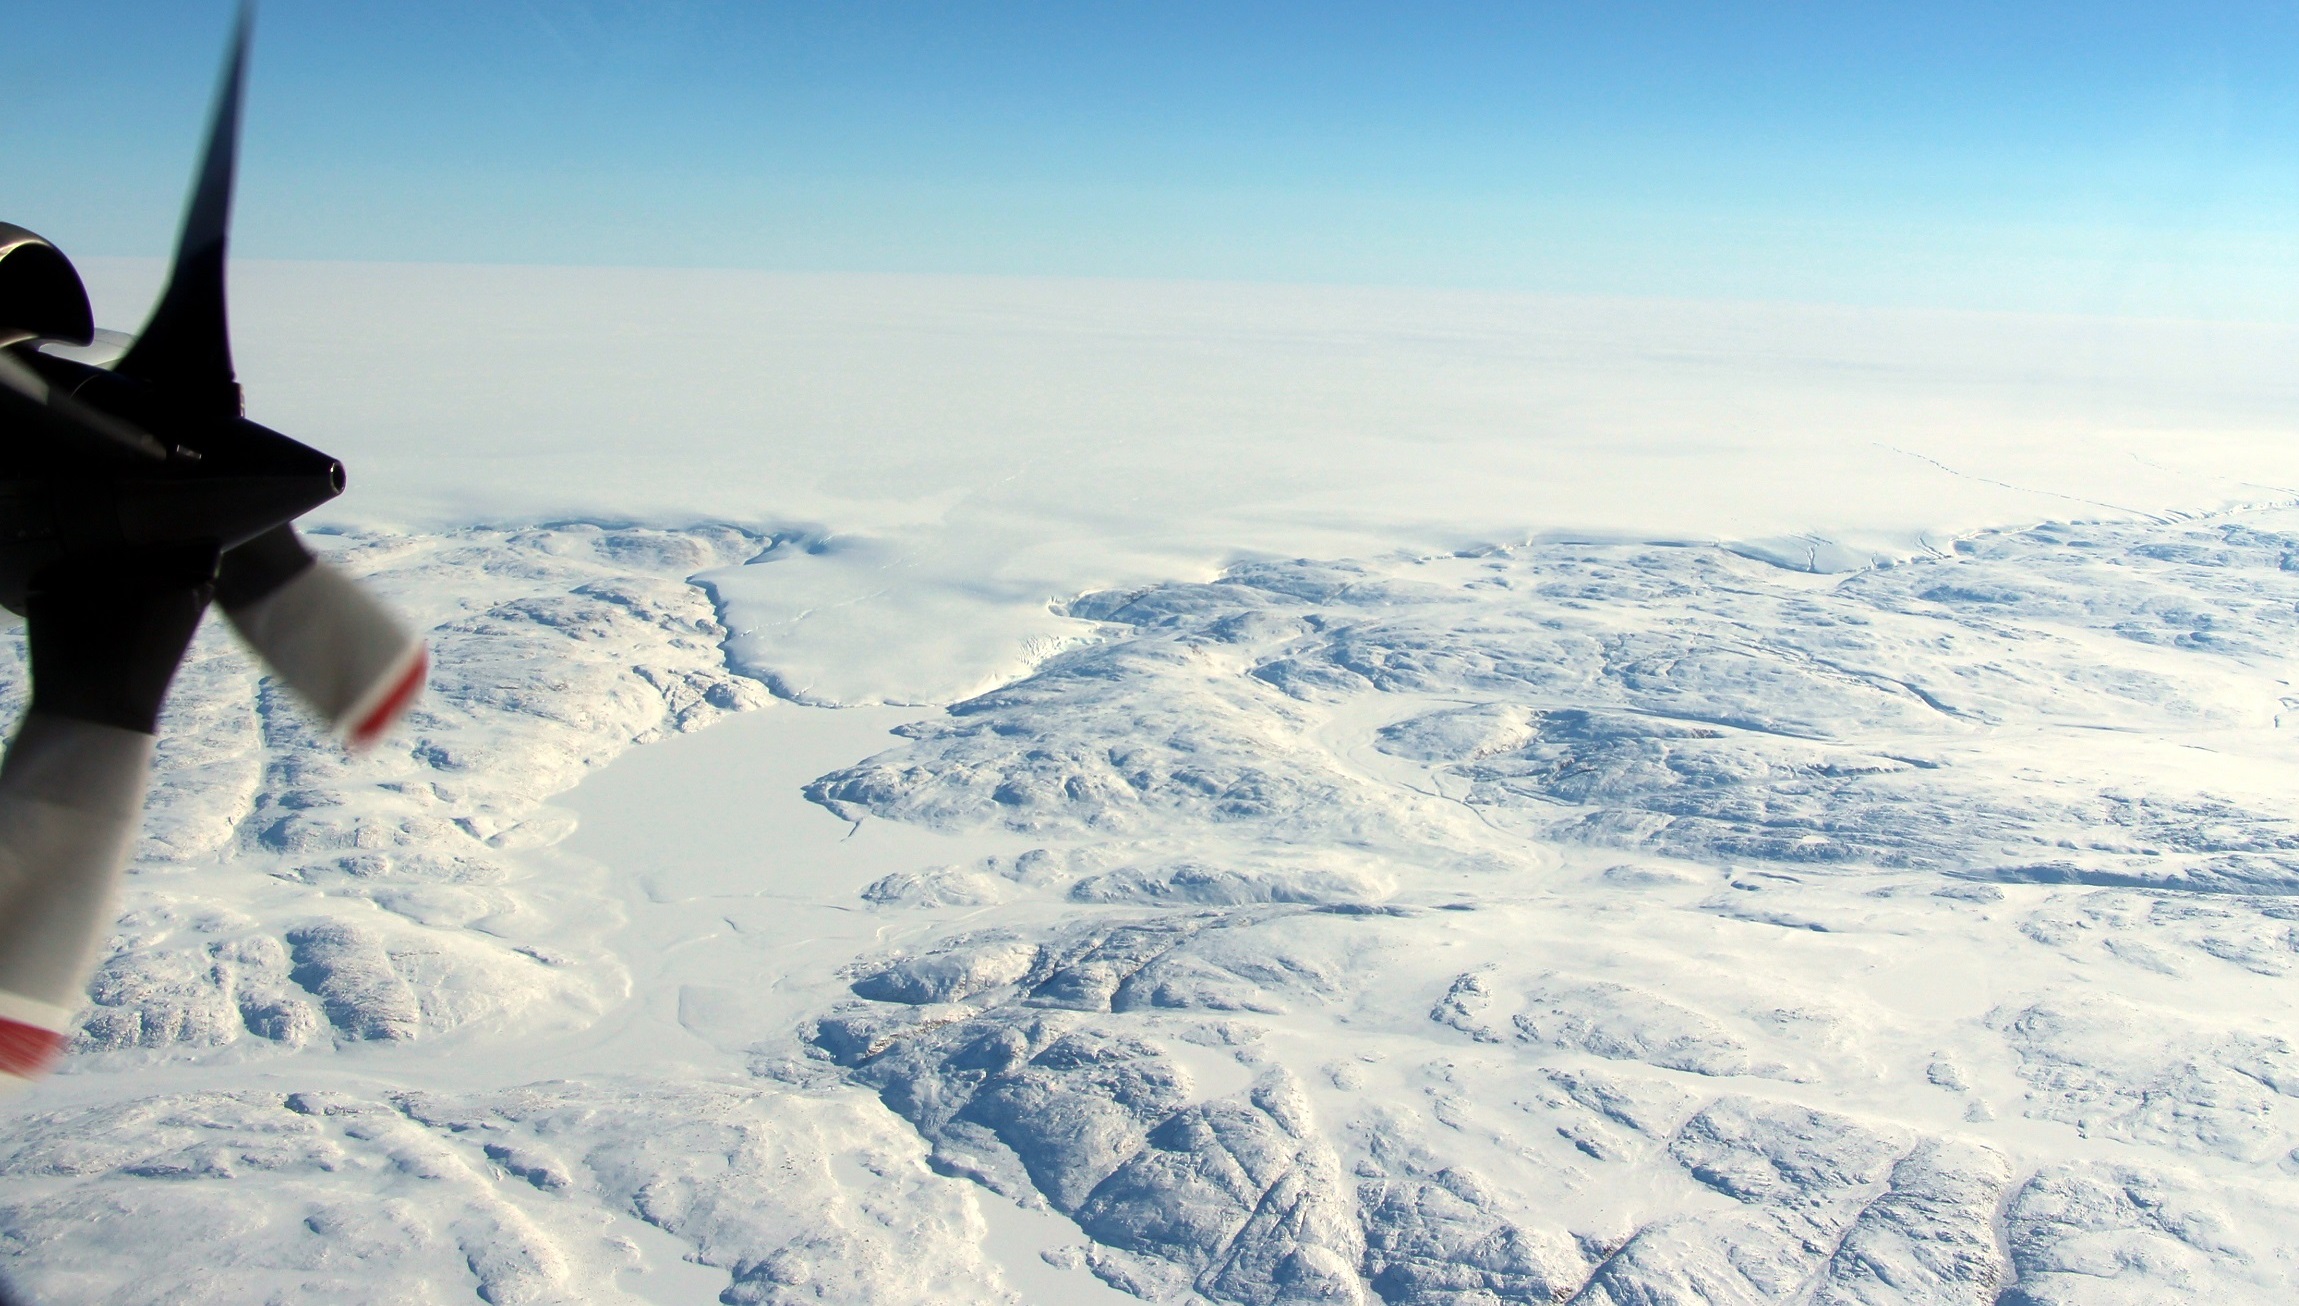 The Hiawatha impact crater is covered by the Greenland Ice Sheet, which flows just beyond the crater rim, forming a semi-circular edge.